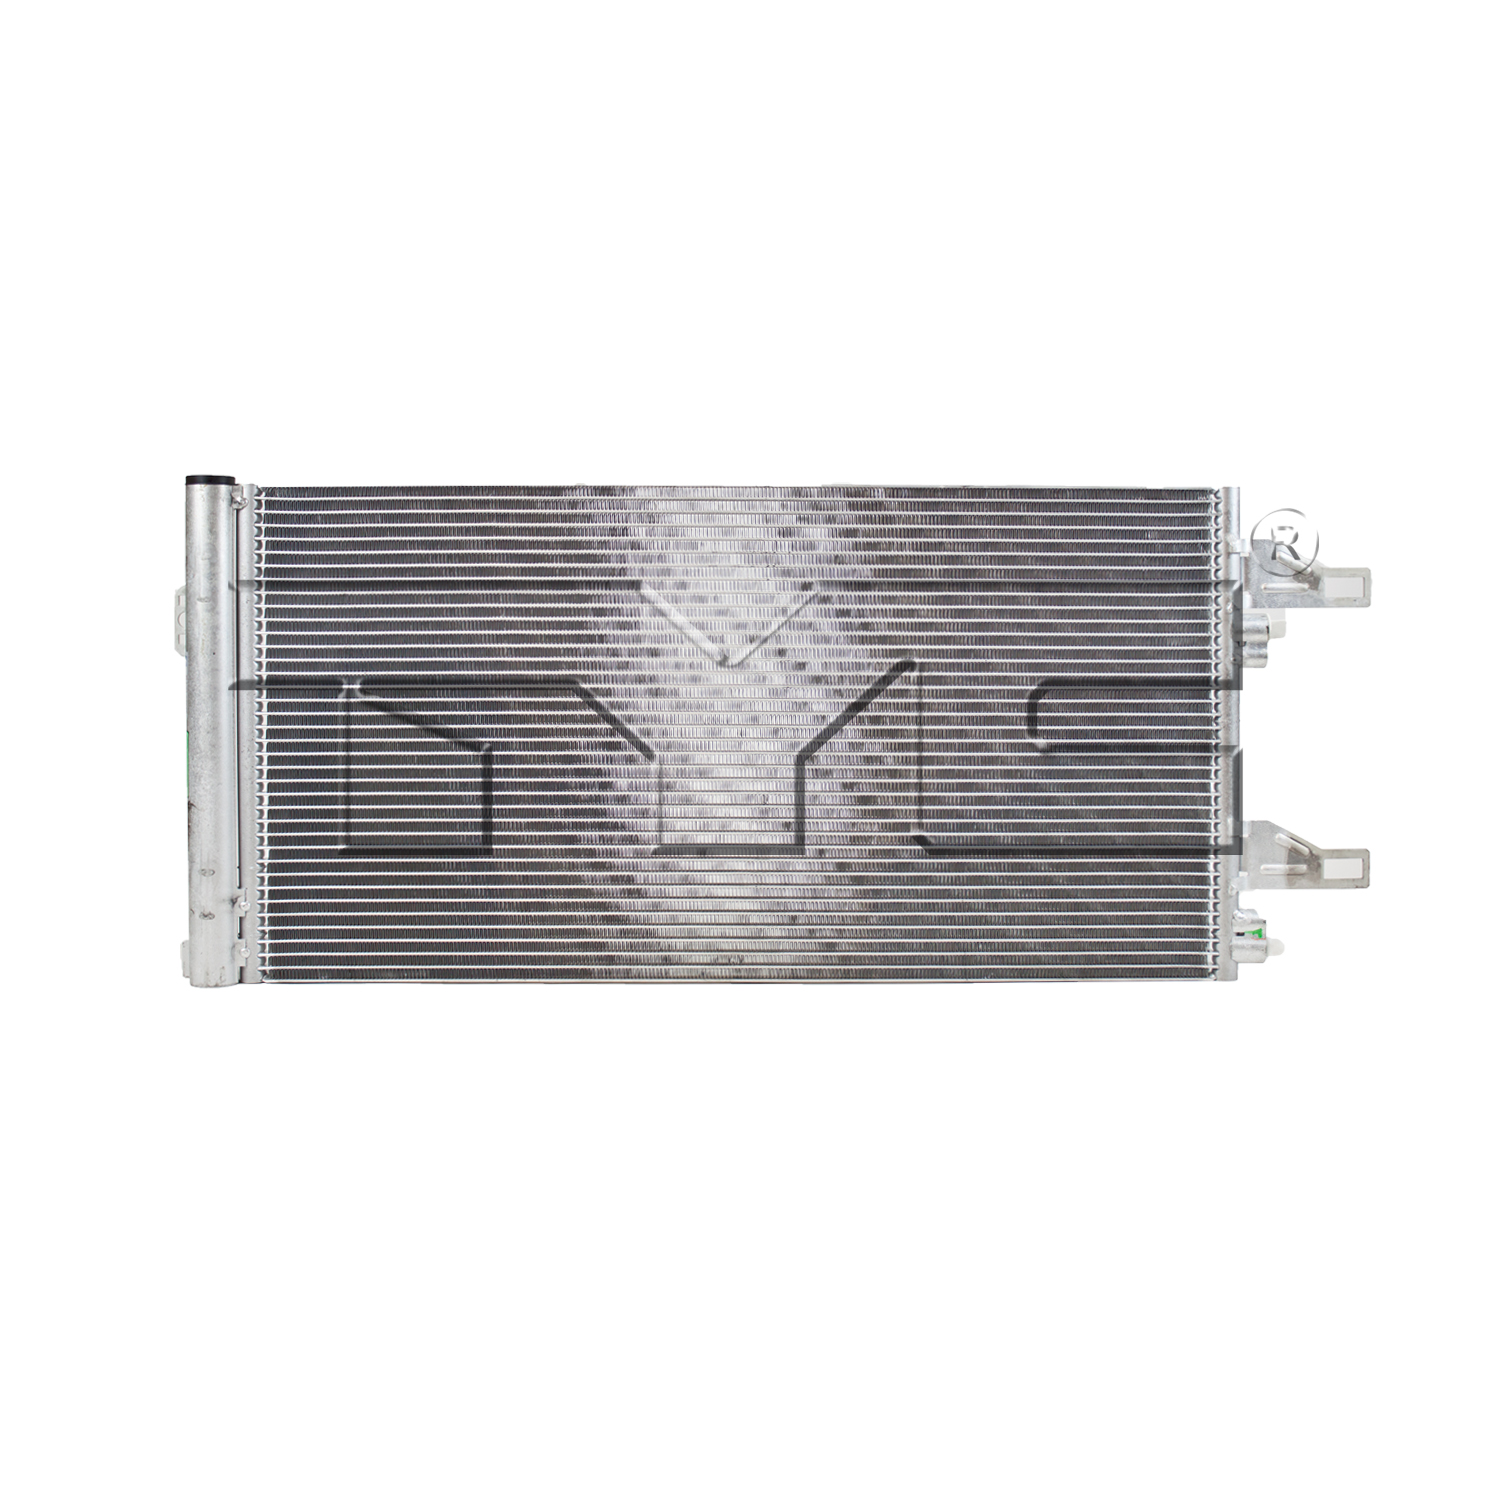 Aftermarket AC CONDENSERS for RAM - PROMASTER 2500, PROMASTER 2500,14-23,Air conditioning condenser